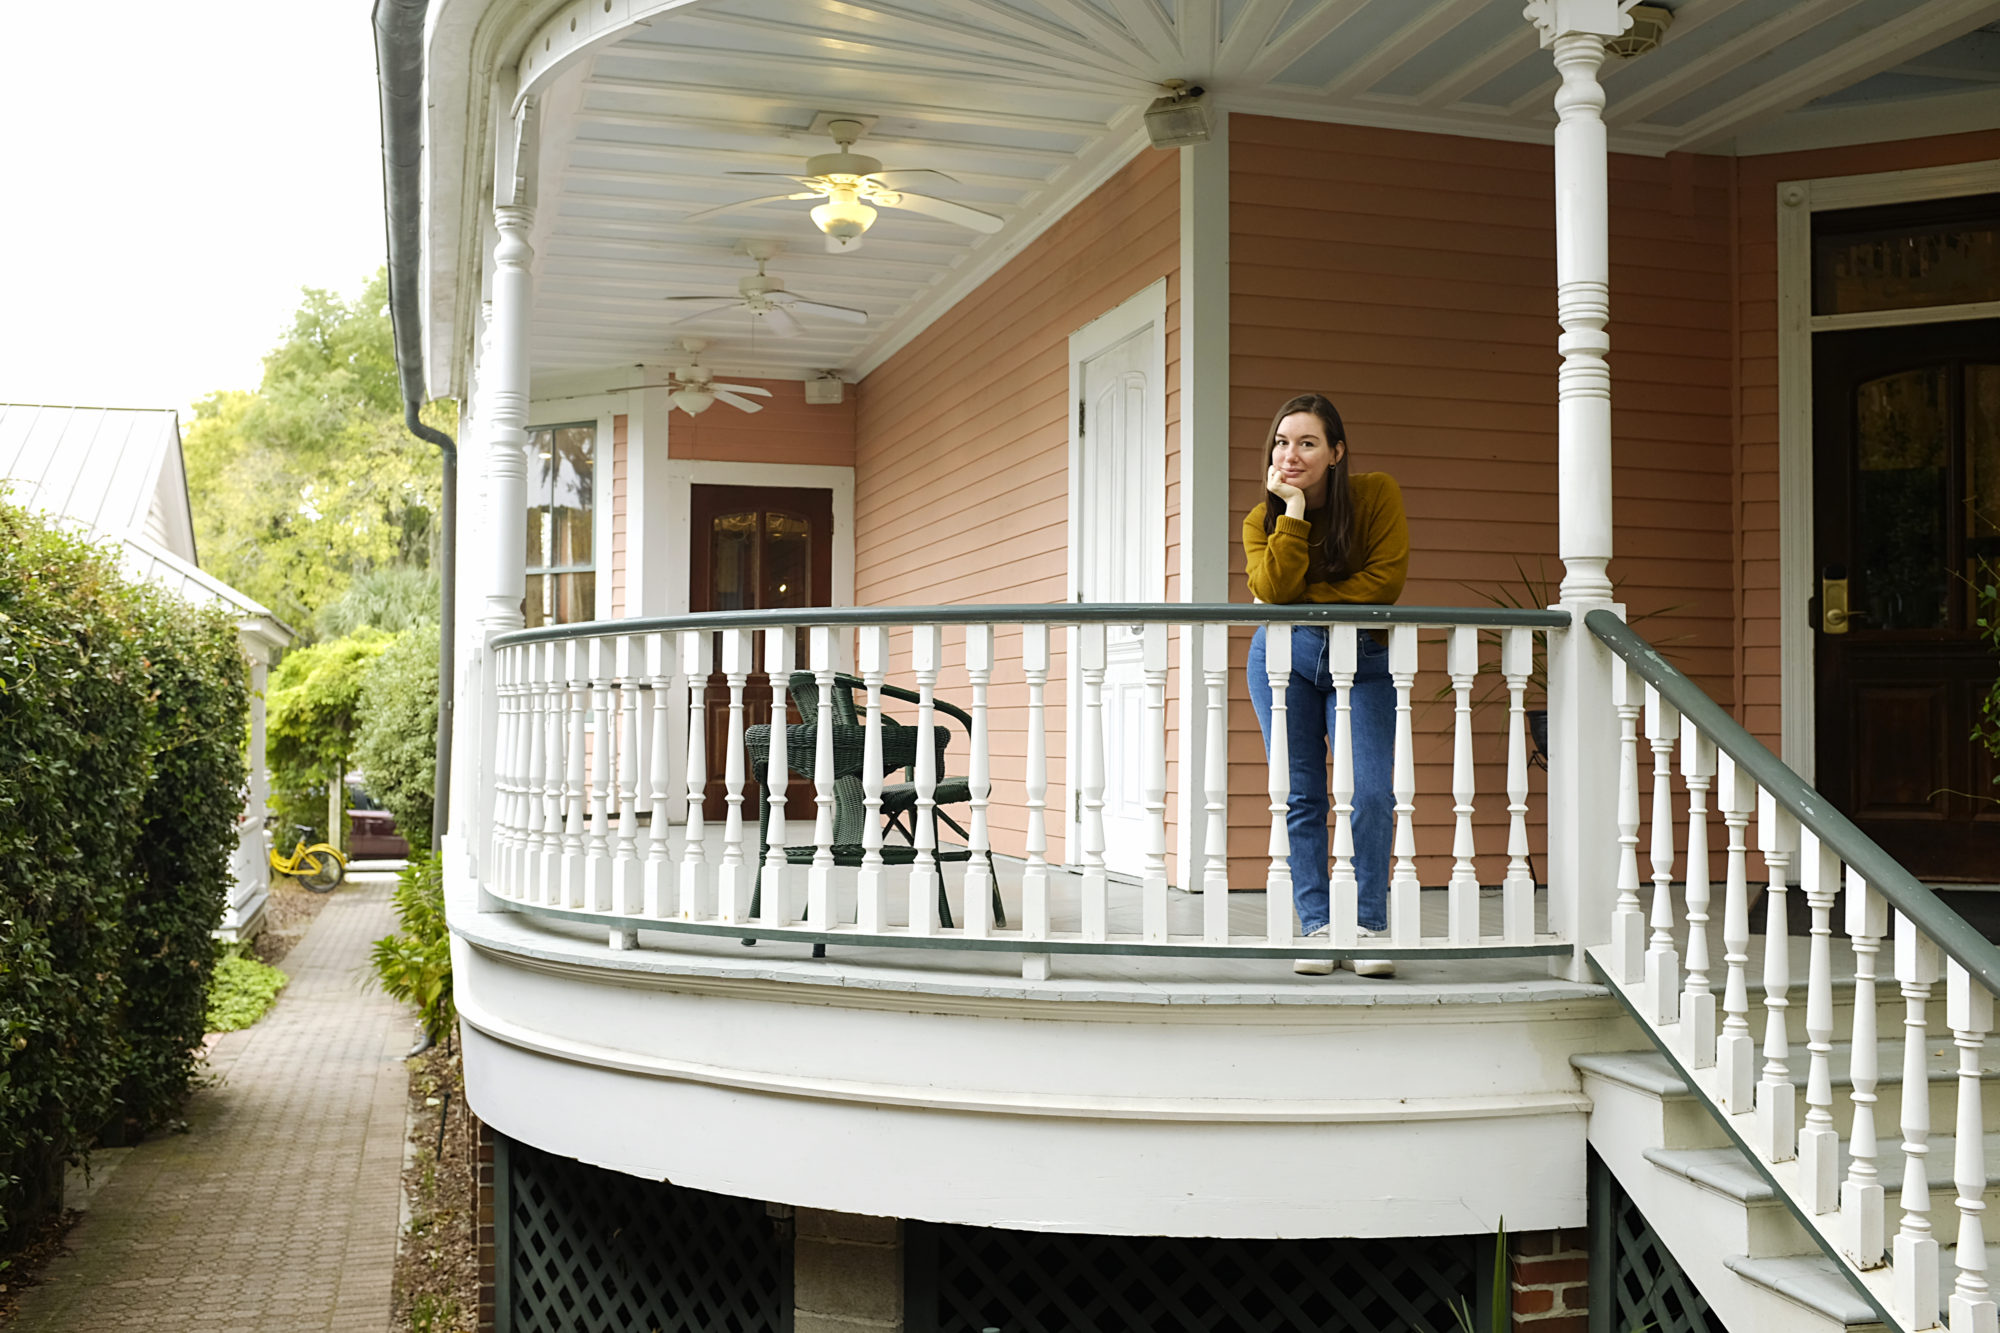 Alyssa stands on the porch at The Beaufort Inn